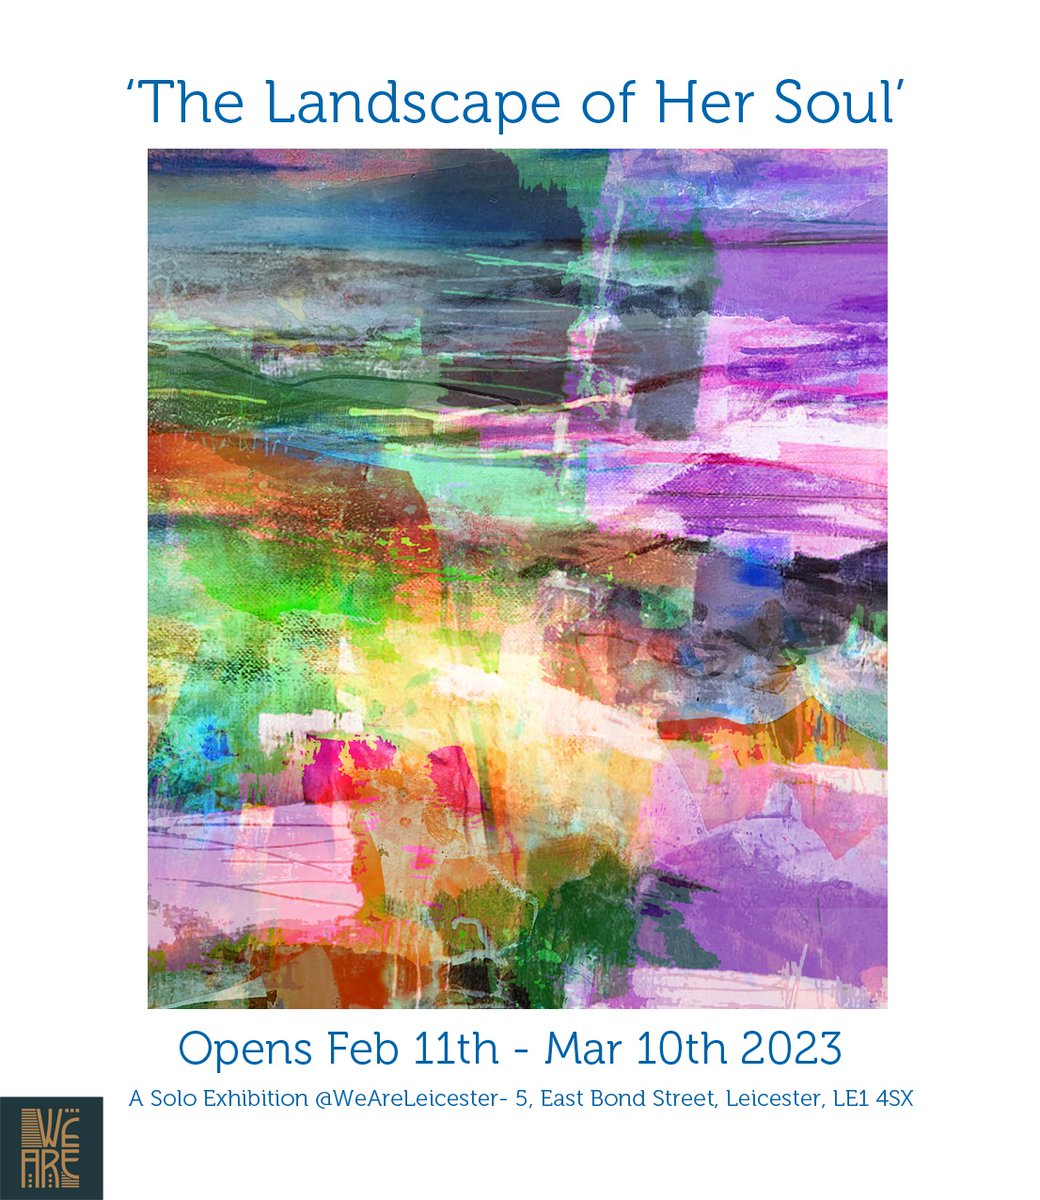 Opening today until March 10th 'The Landscape of her Soul' Exhibition #weareleicester within #Jamesbistro #art #leicester #artforsale #painting #artistontwitter #mixedmedia